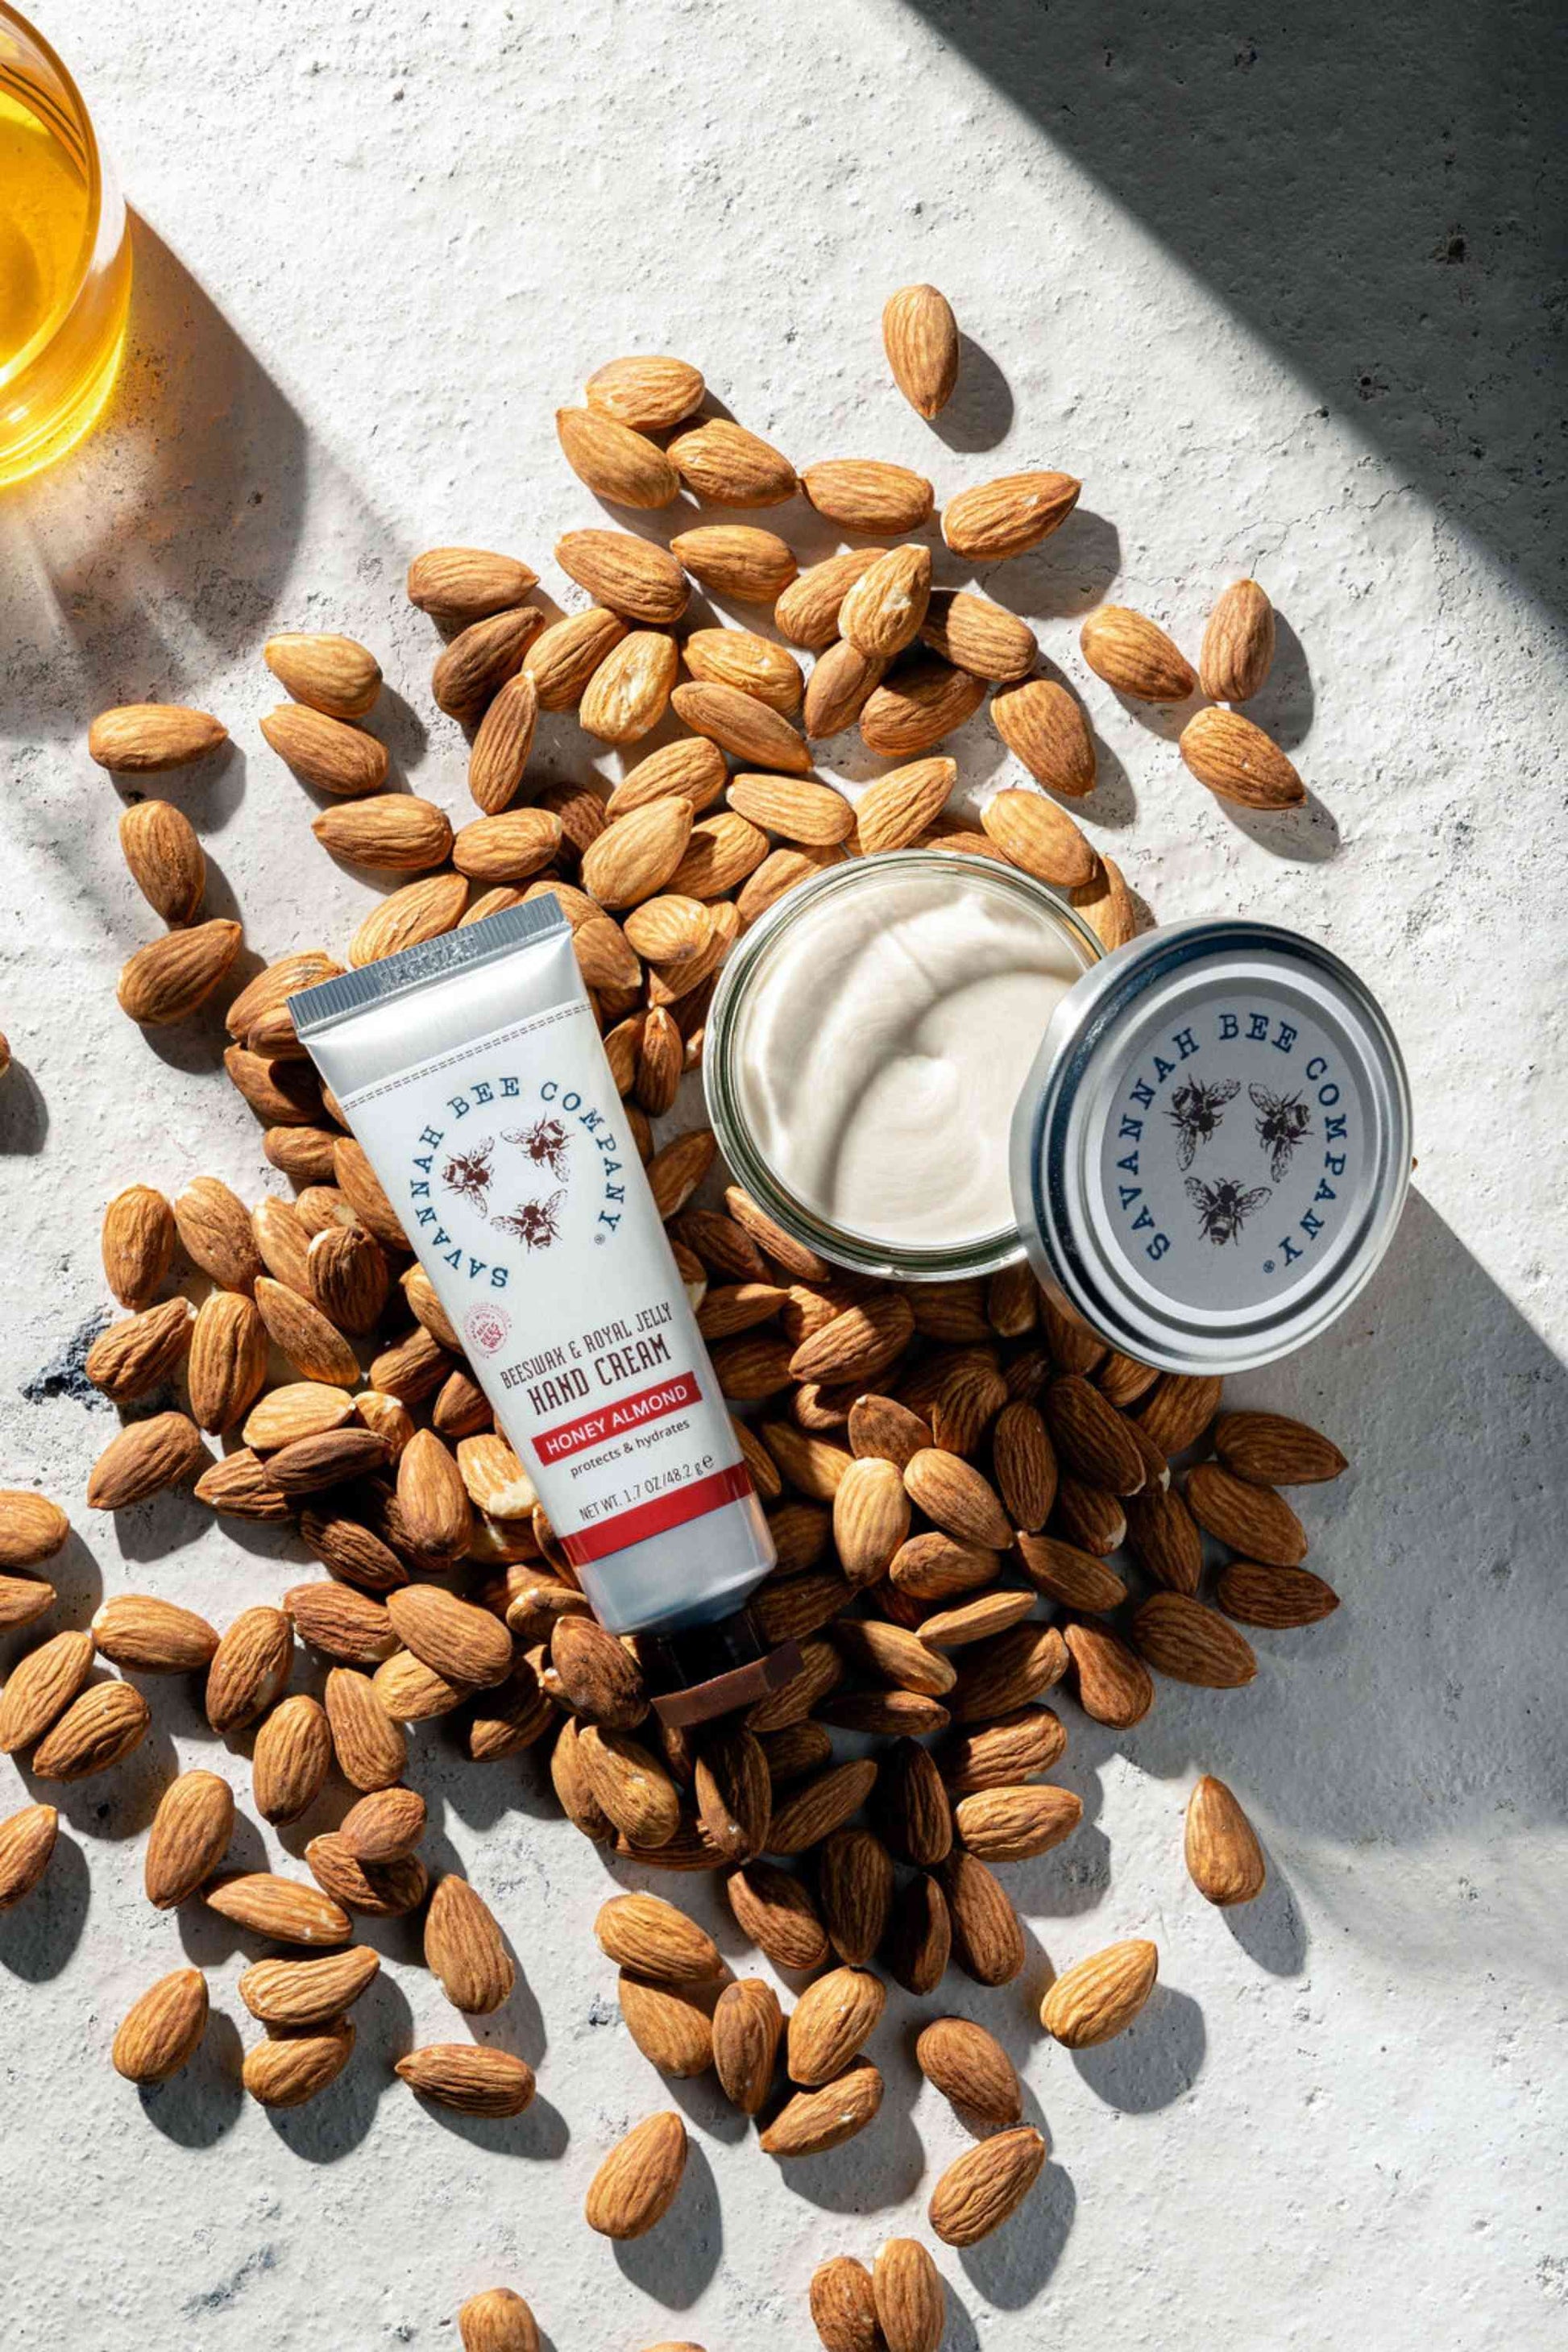 Honey Almond Beeswax & Royal Jelly Hand cream in a Jar or Tube on a pile of almonds.